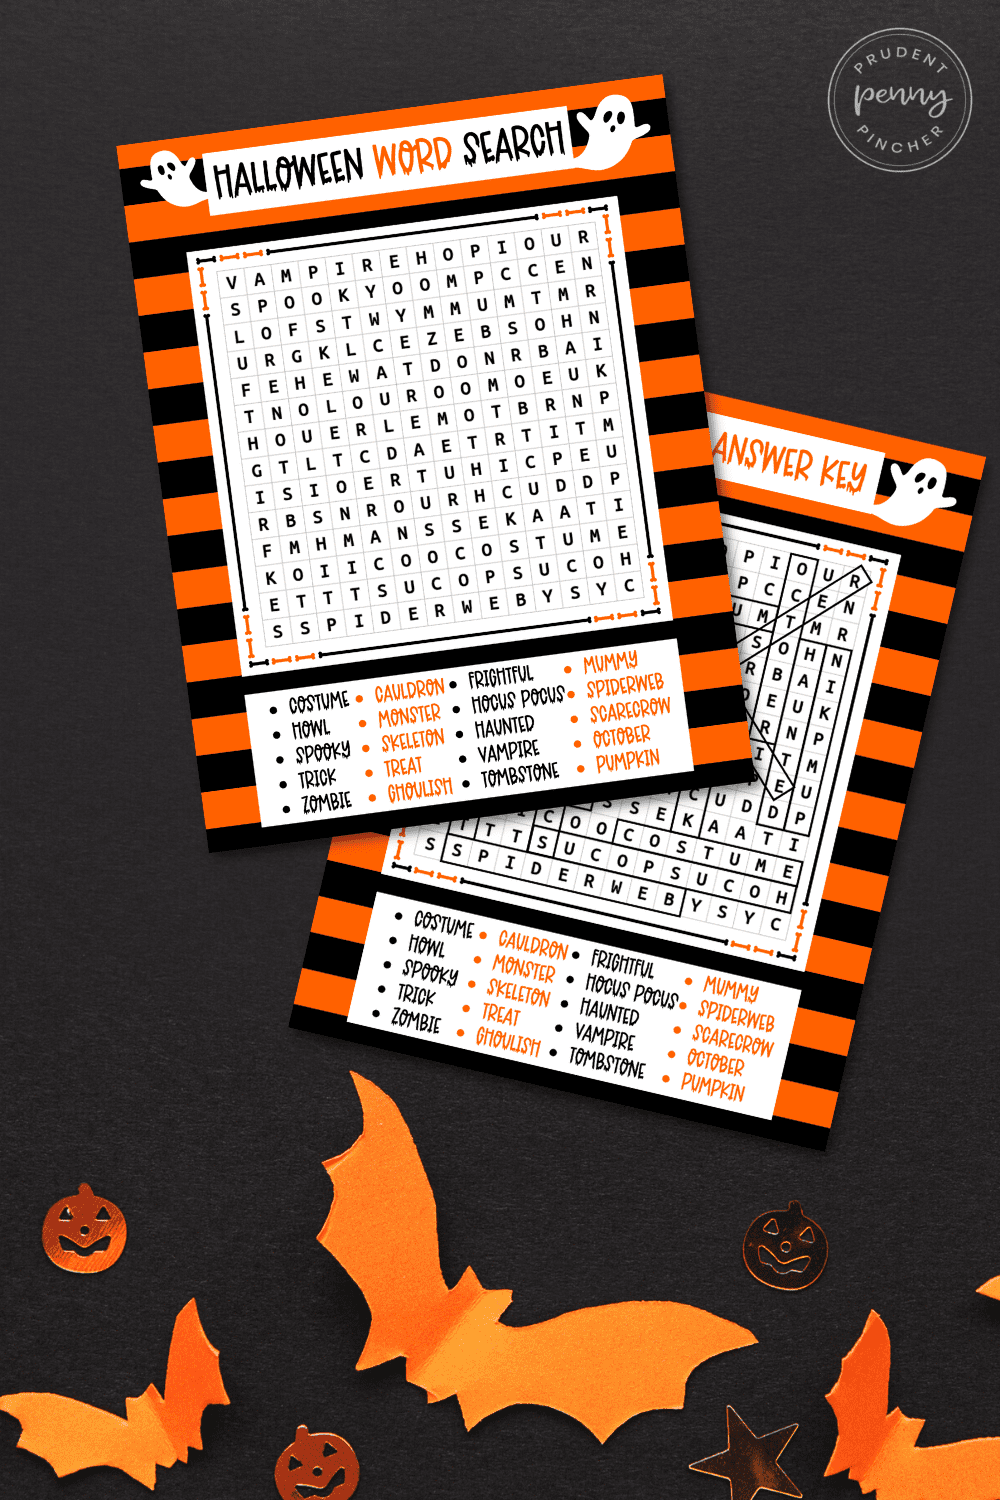 halloween word search printable and answer key on a black background with orange paper bats